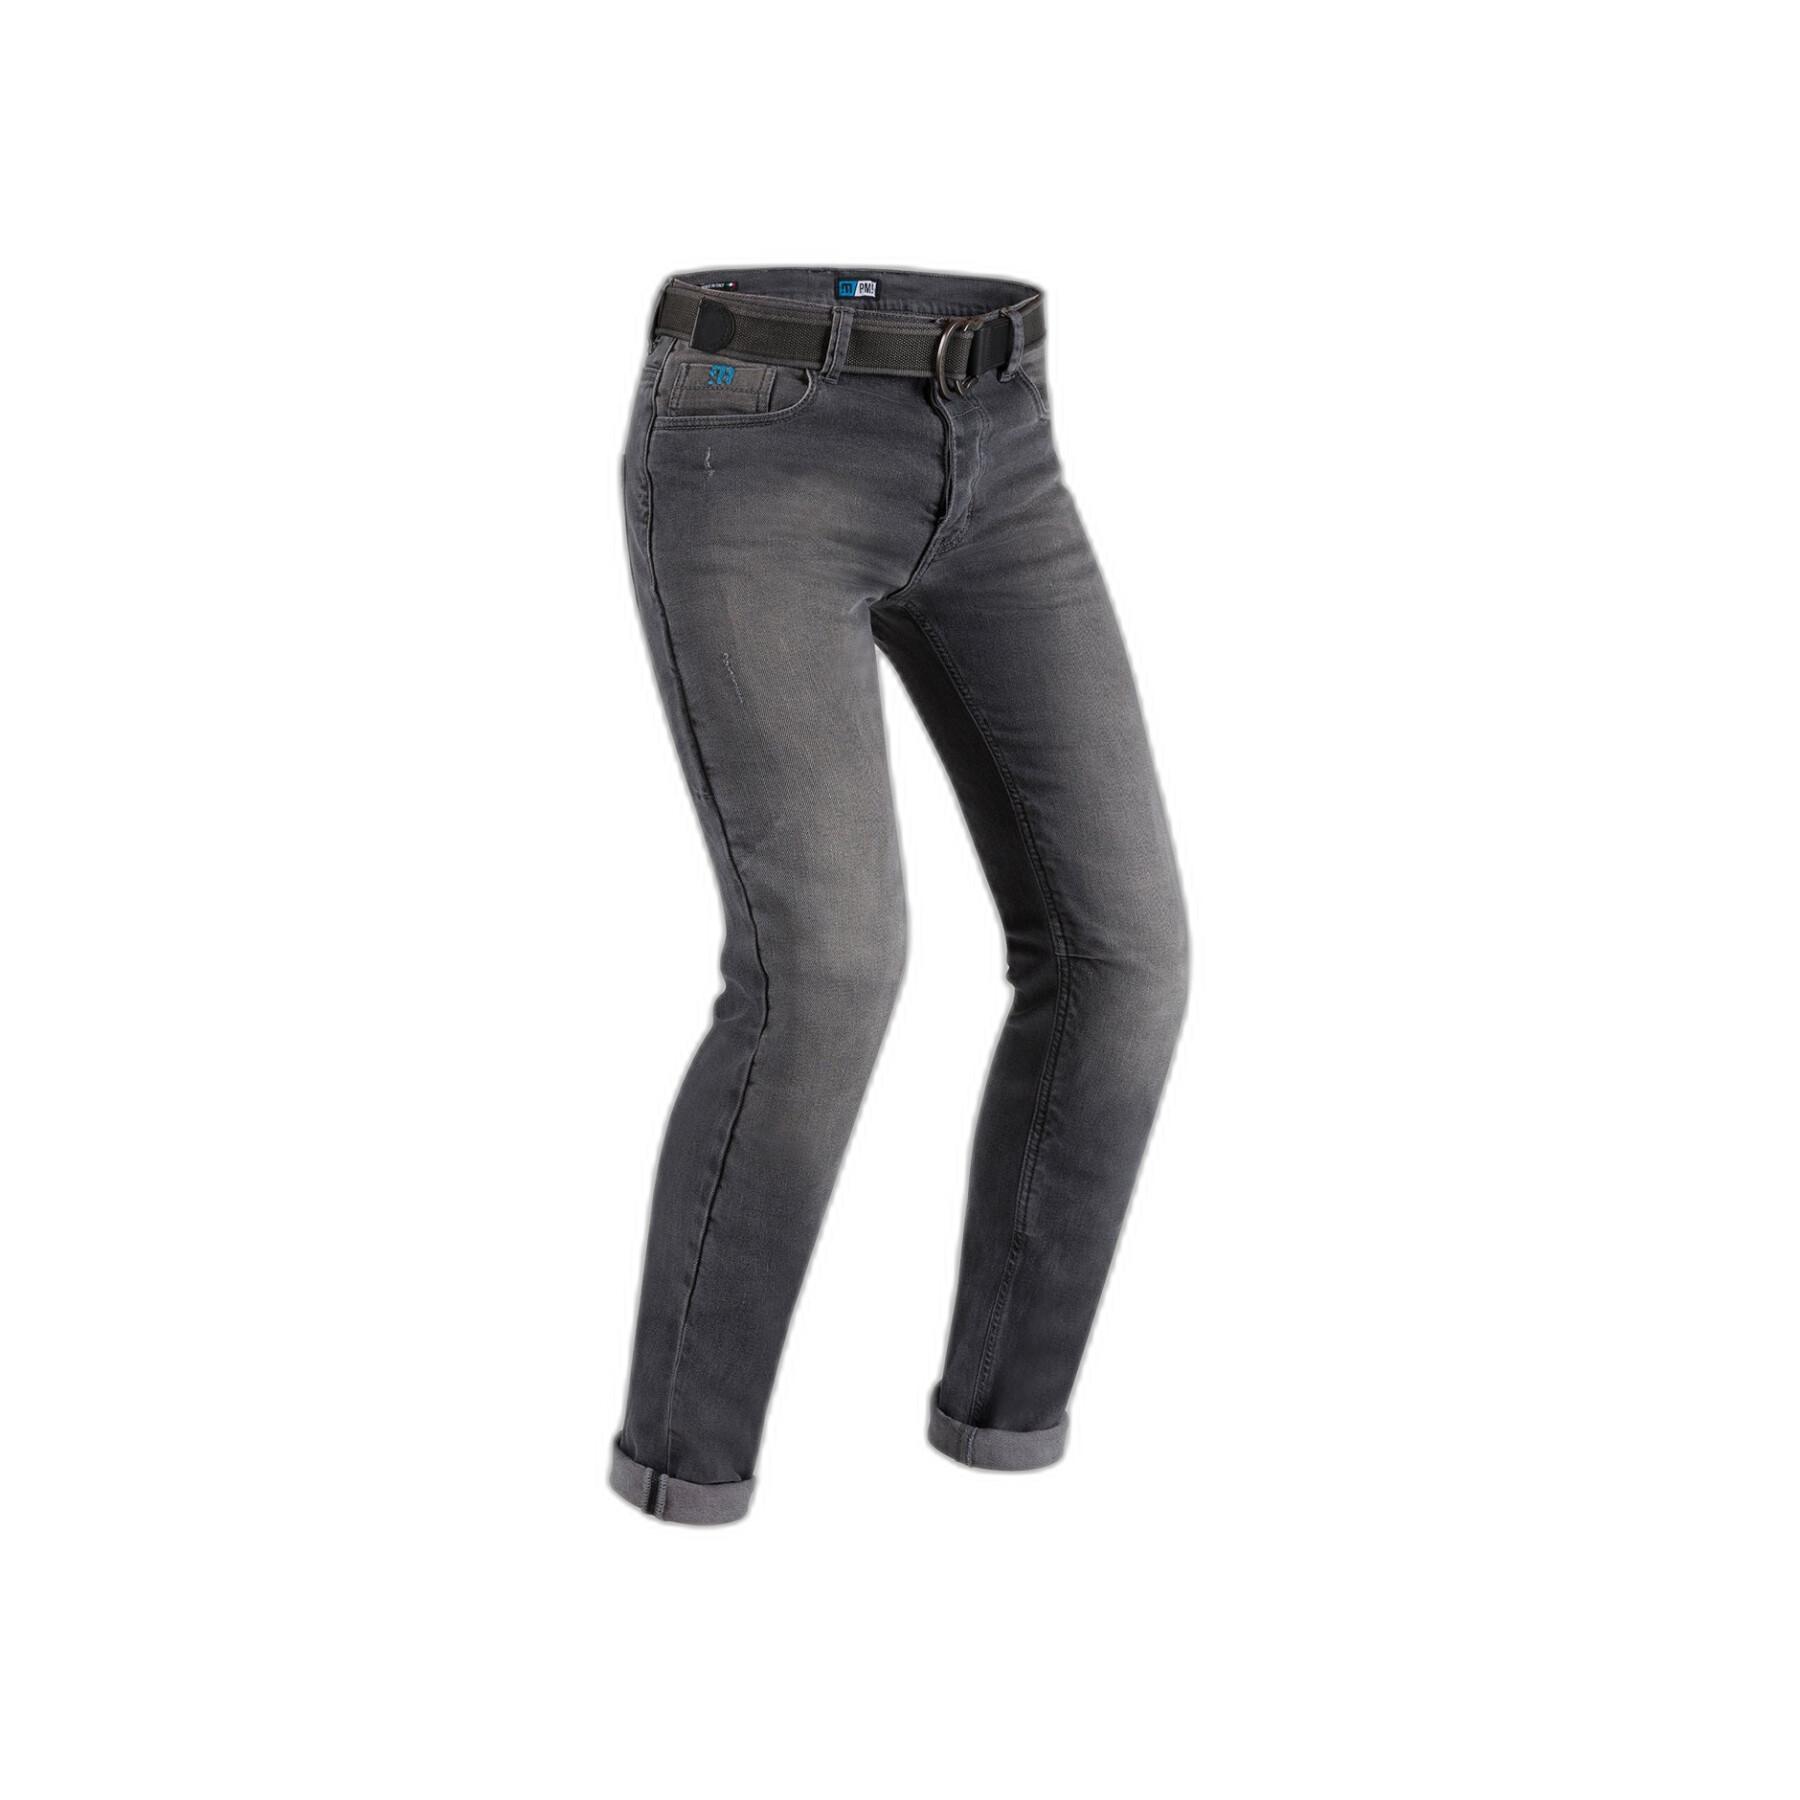 Motorcycle jeans PMJ Caferacer